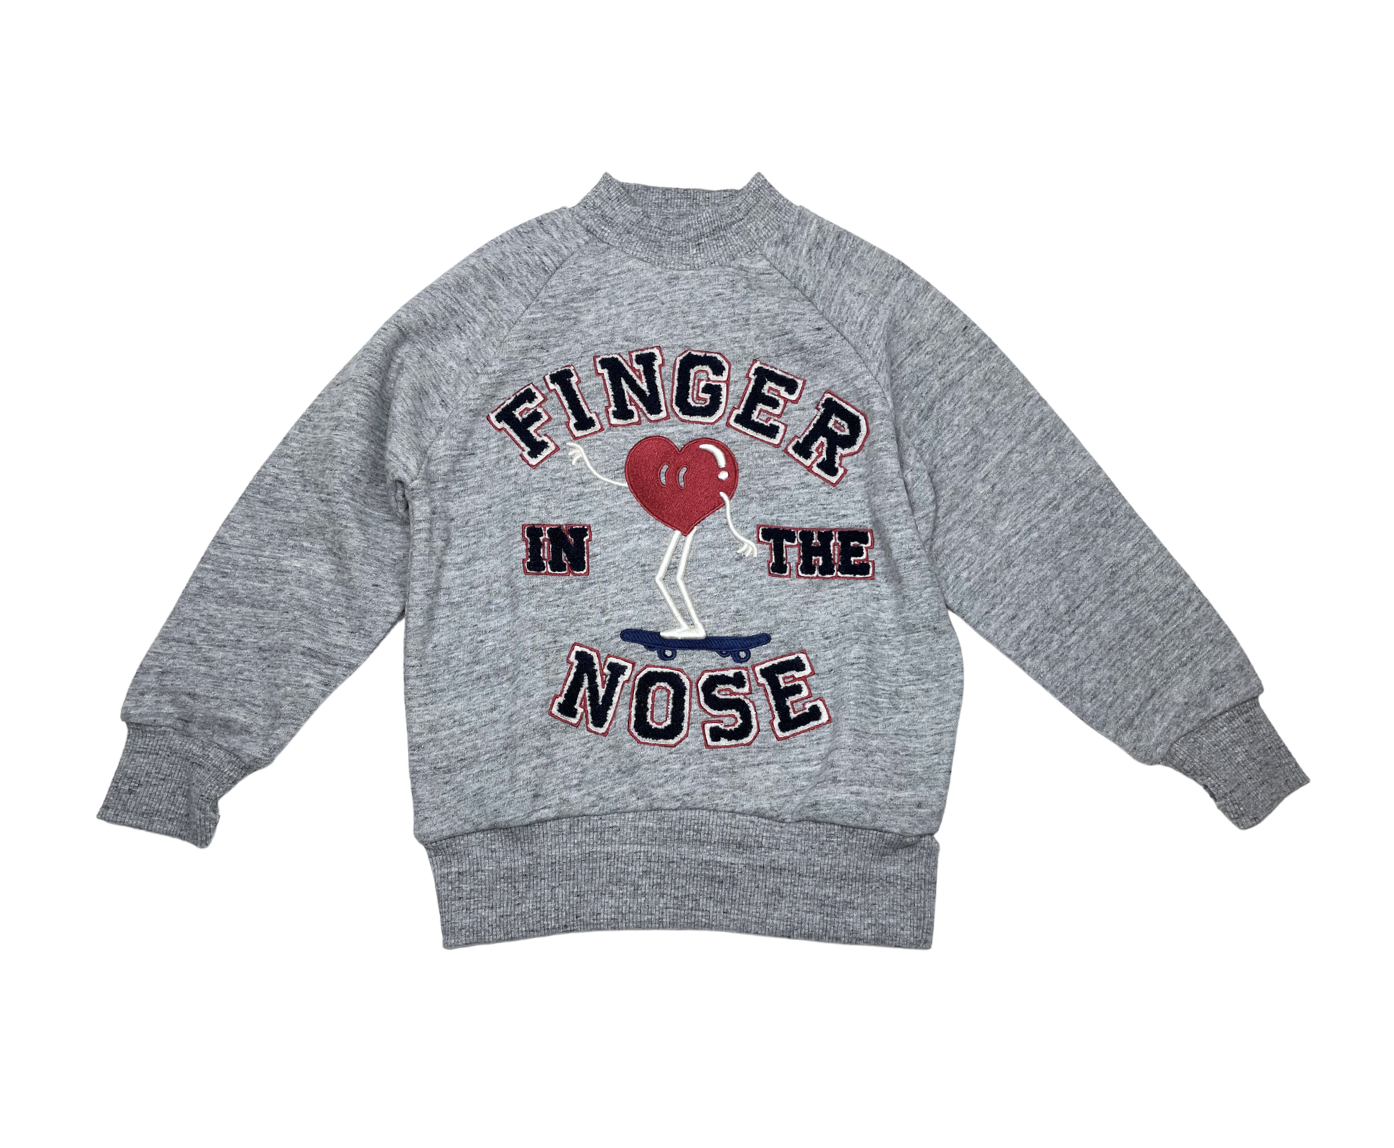 FINGER IN THE NOSE - Sweat gris "finger in the nose" - 4/5 ans